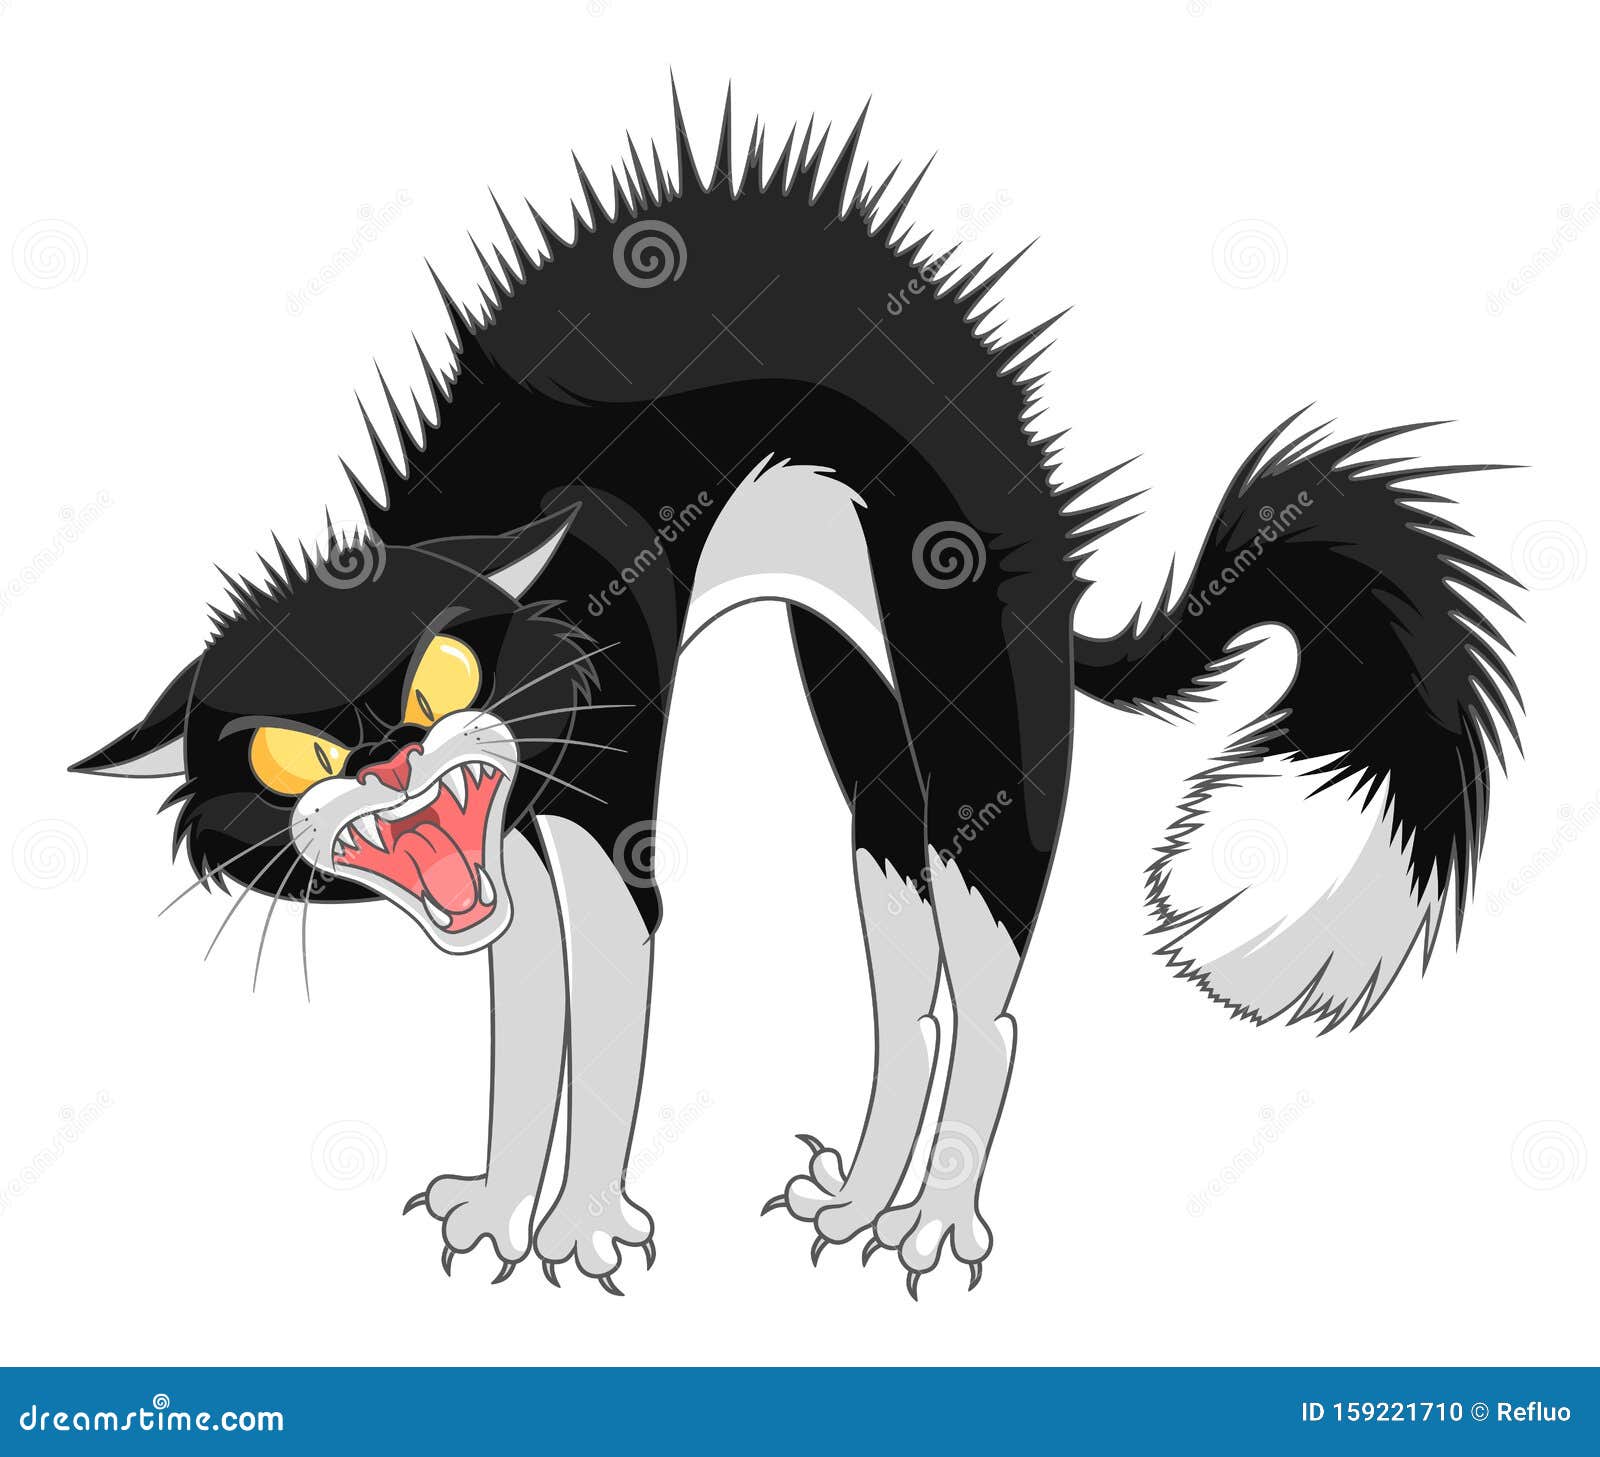 Angry cartoon cat stock vector. Illustration of aggression - 159221710